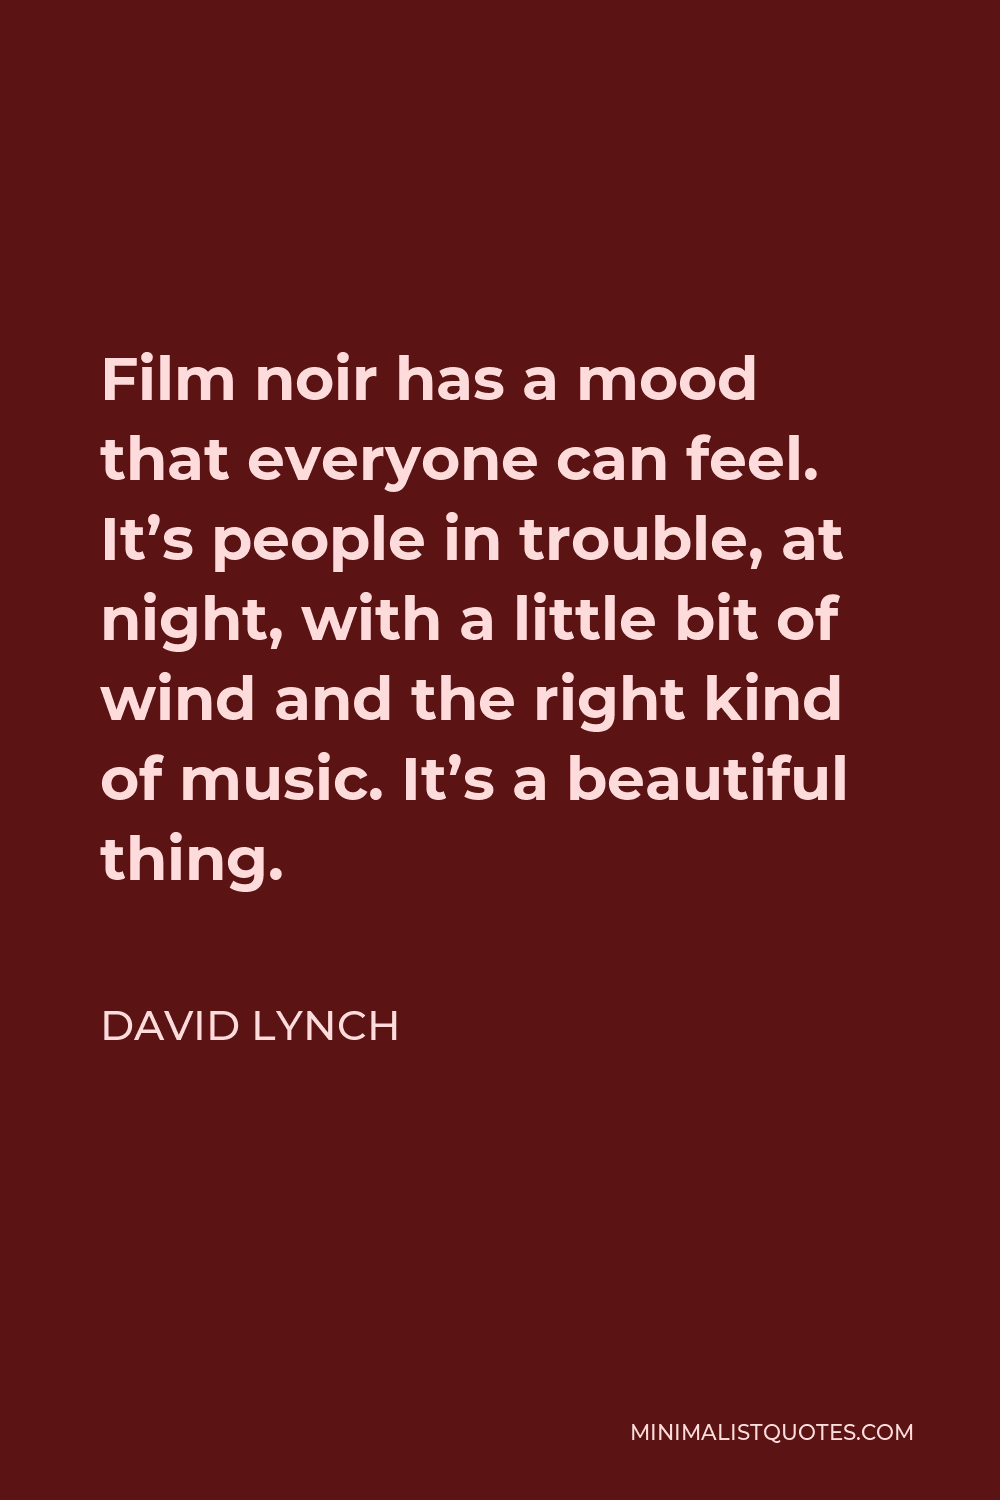 David Lynch Quote - Film noir has a mood that everyone can feel. It’s people in trouble, at night, with a little bit of wind and the right kind of music. It’s a beautiful thing.